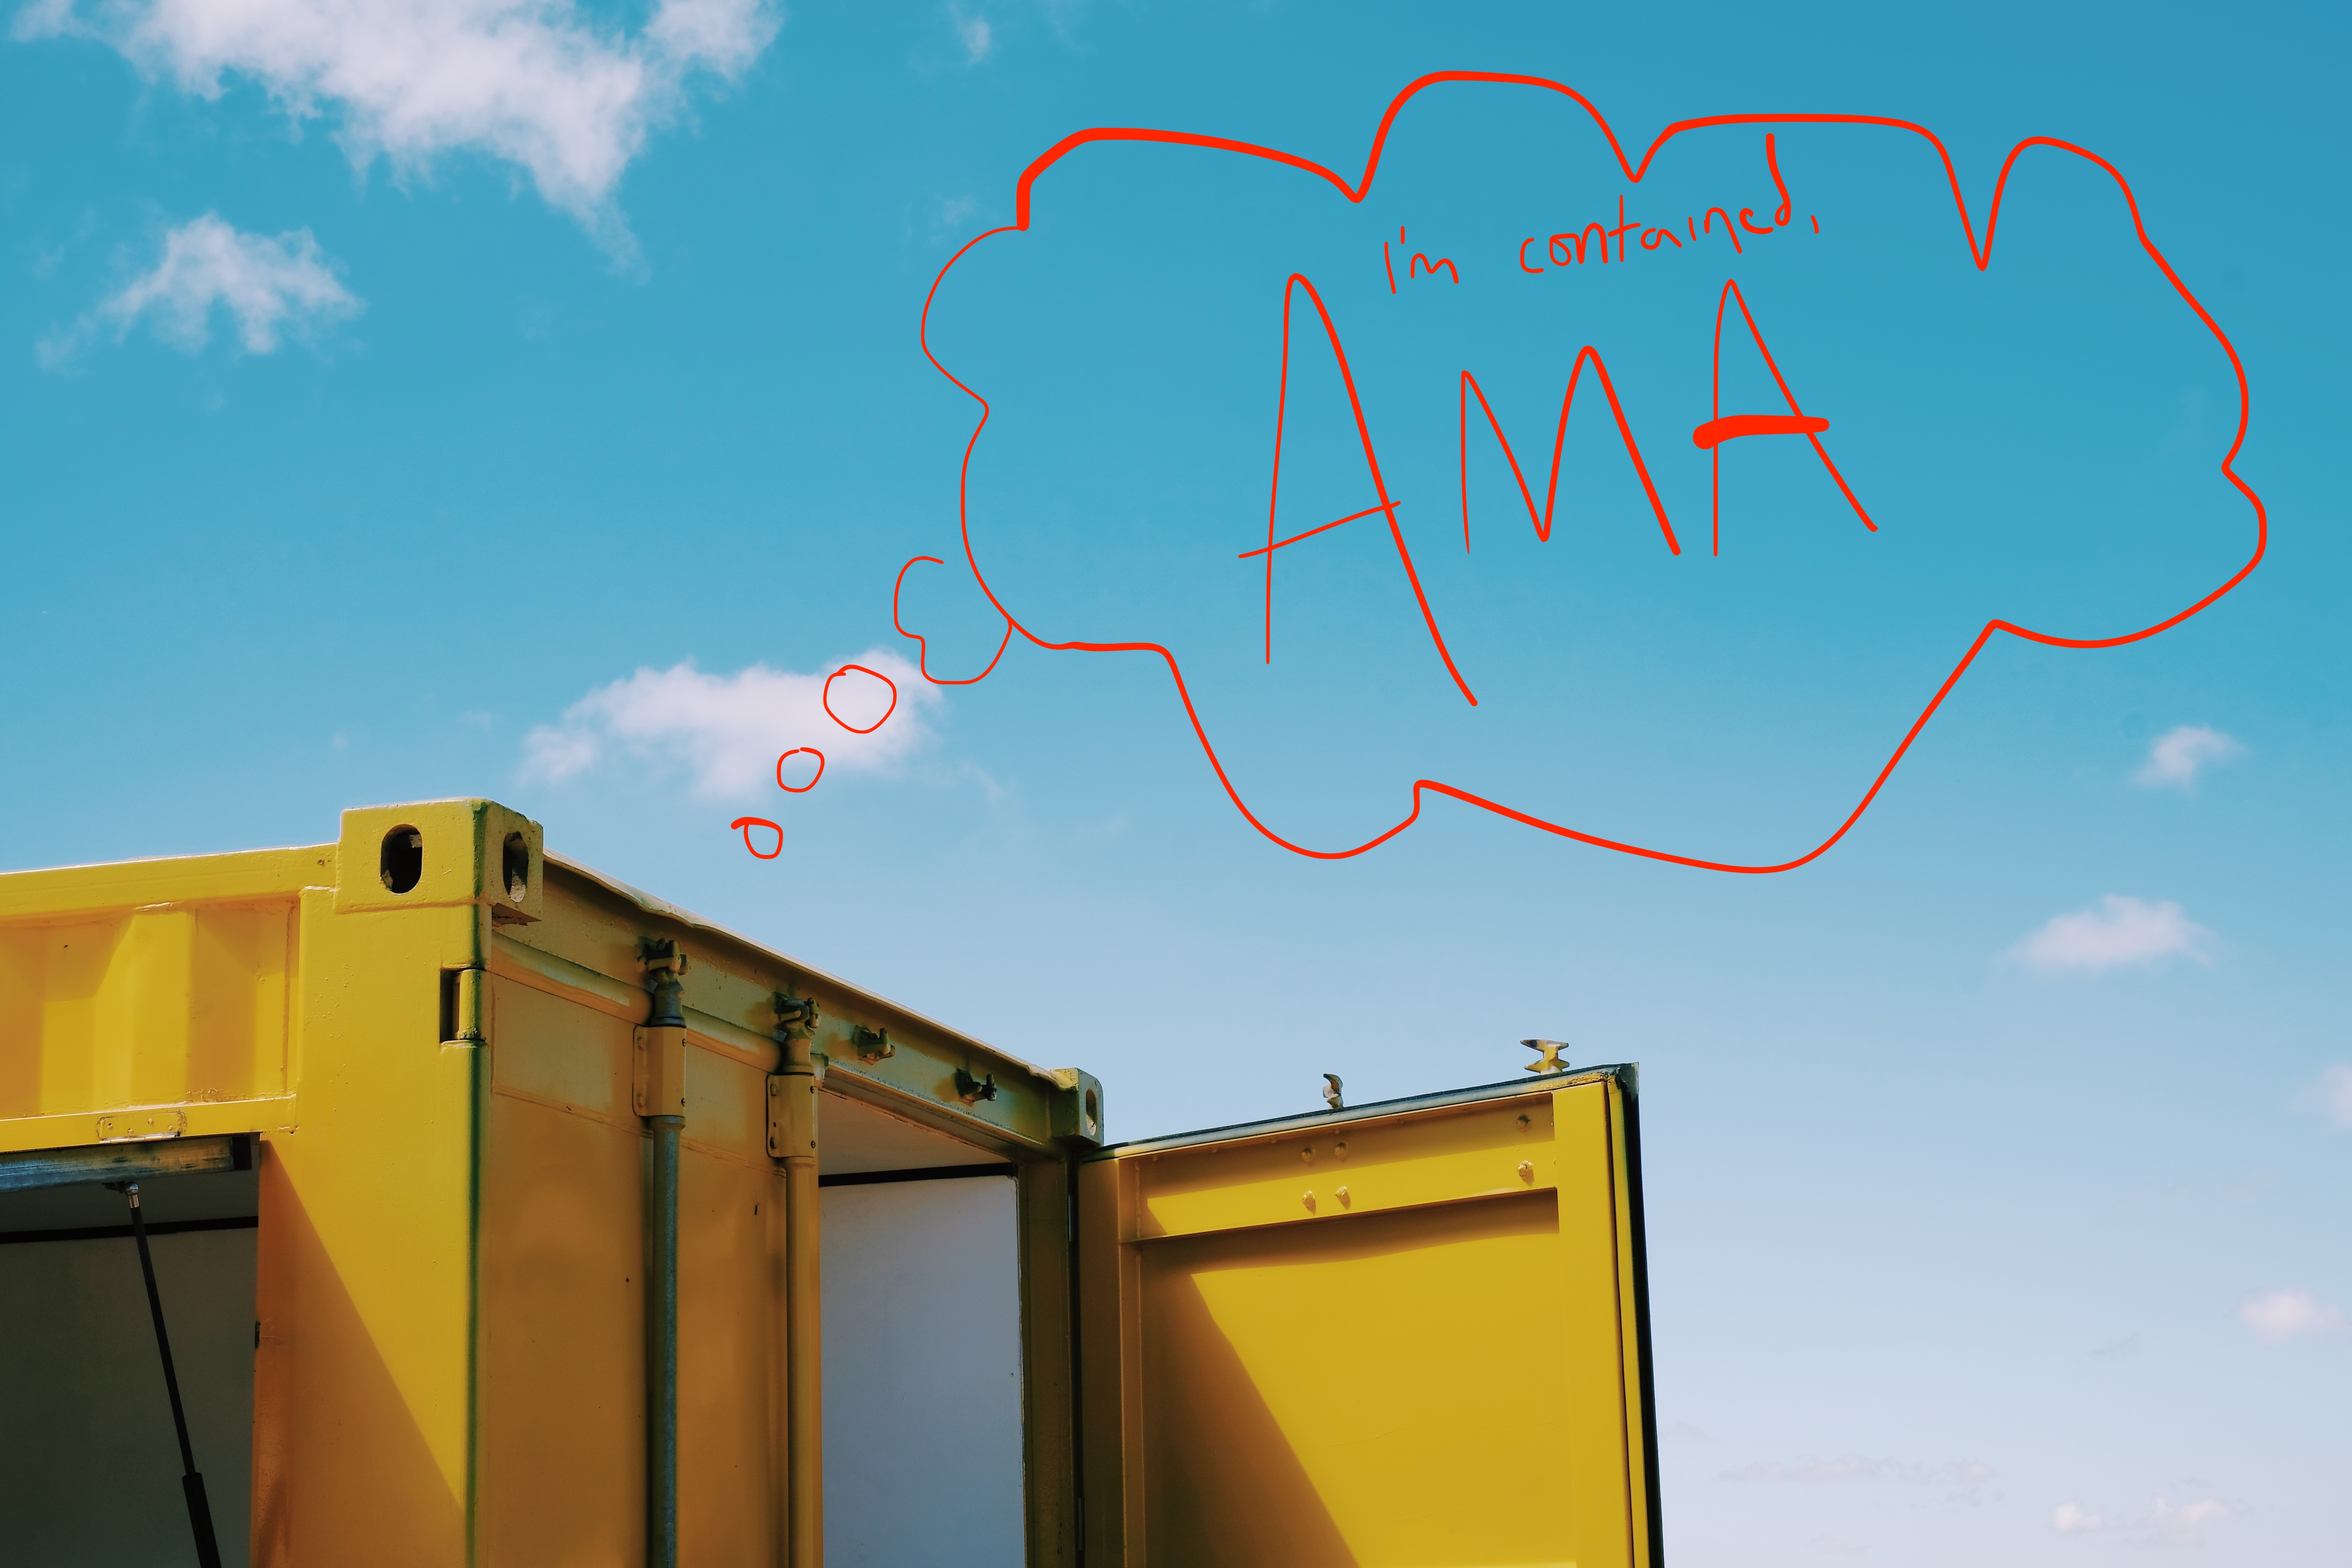 Yellow shipping container
with a red hand-written speech bubble:
I'm contained, AMA
